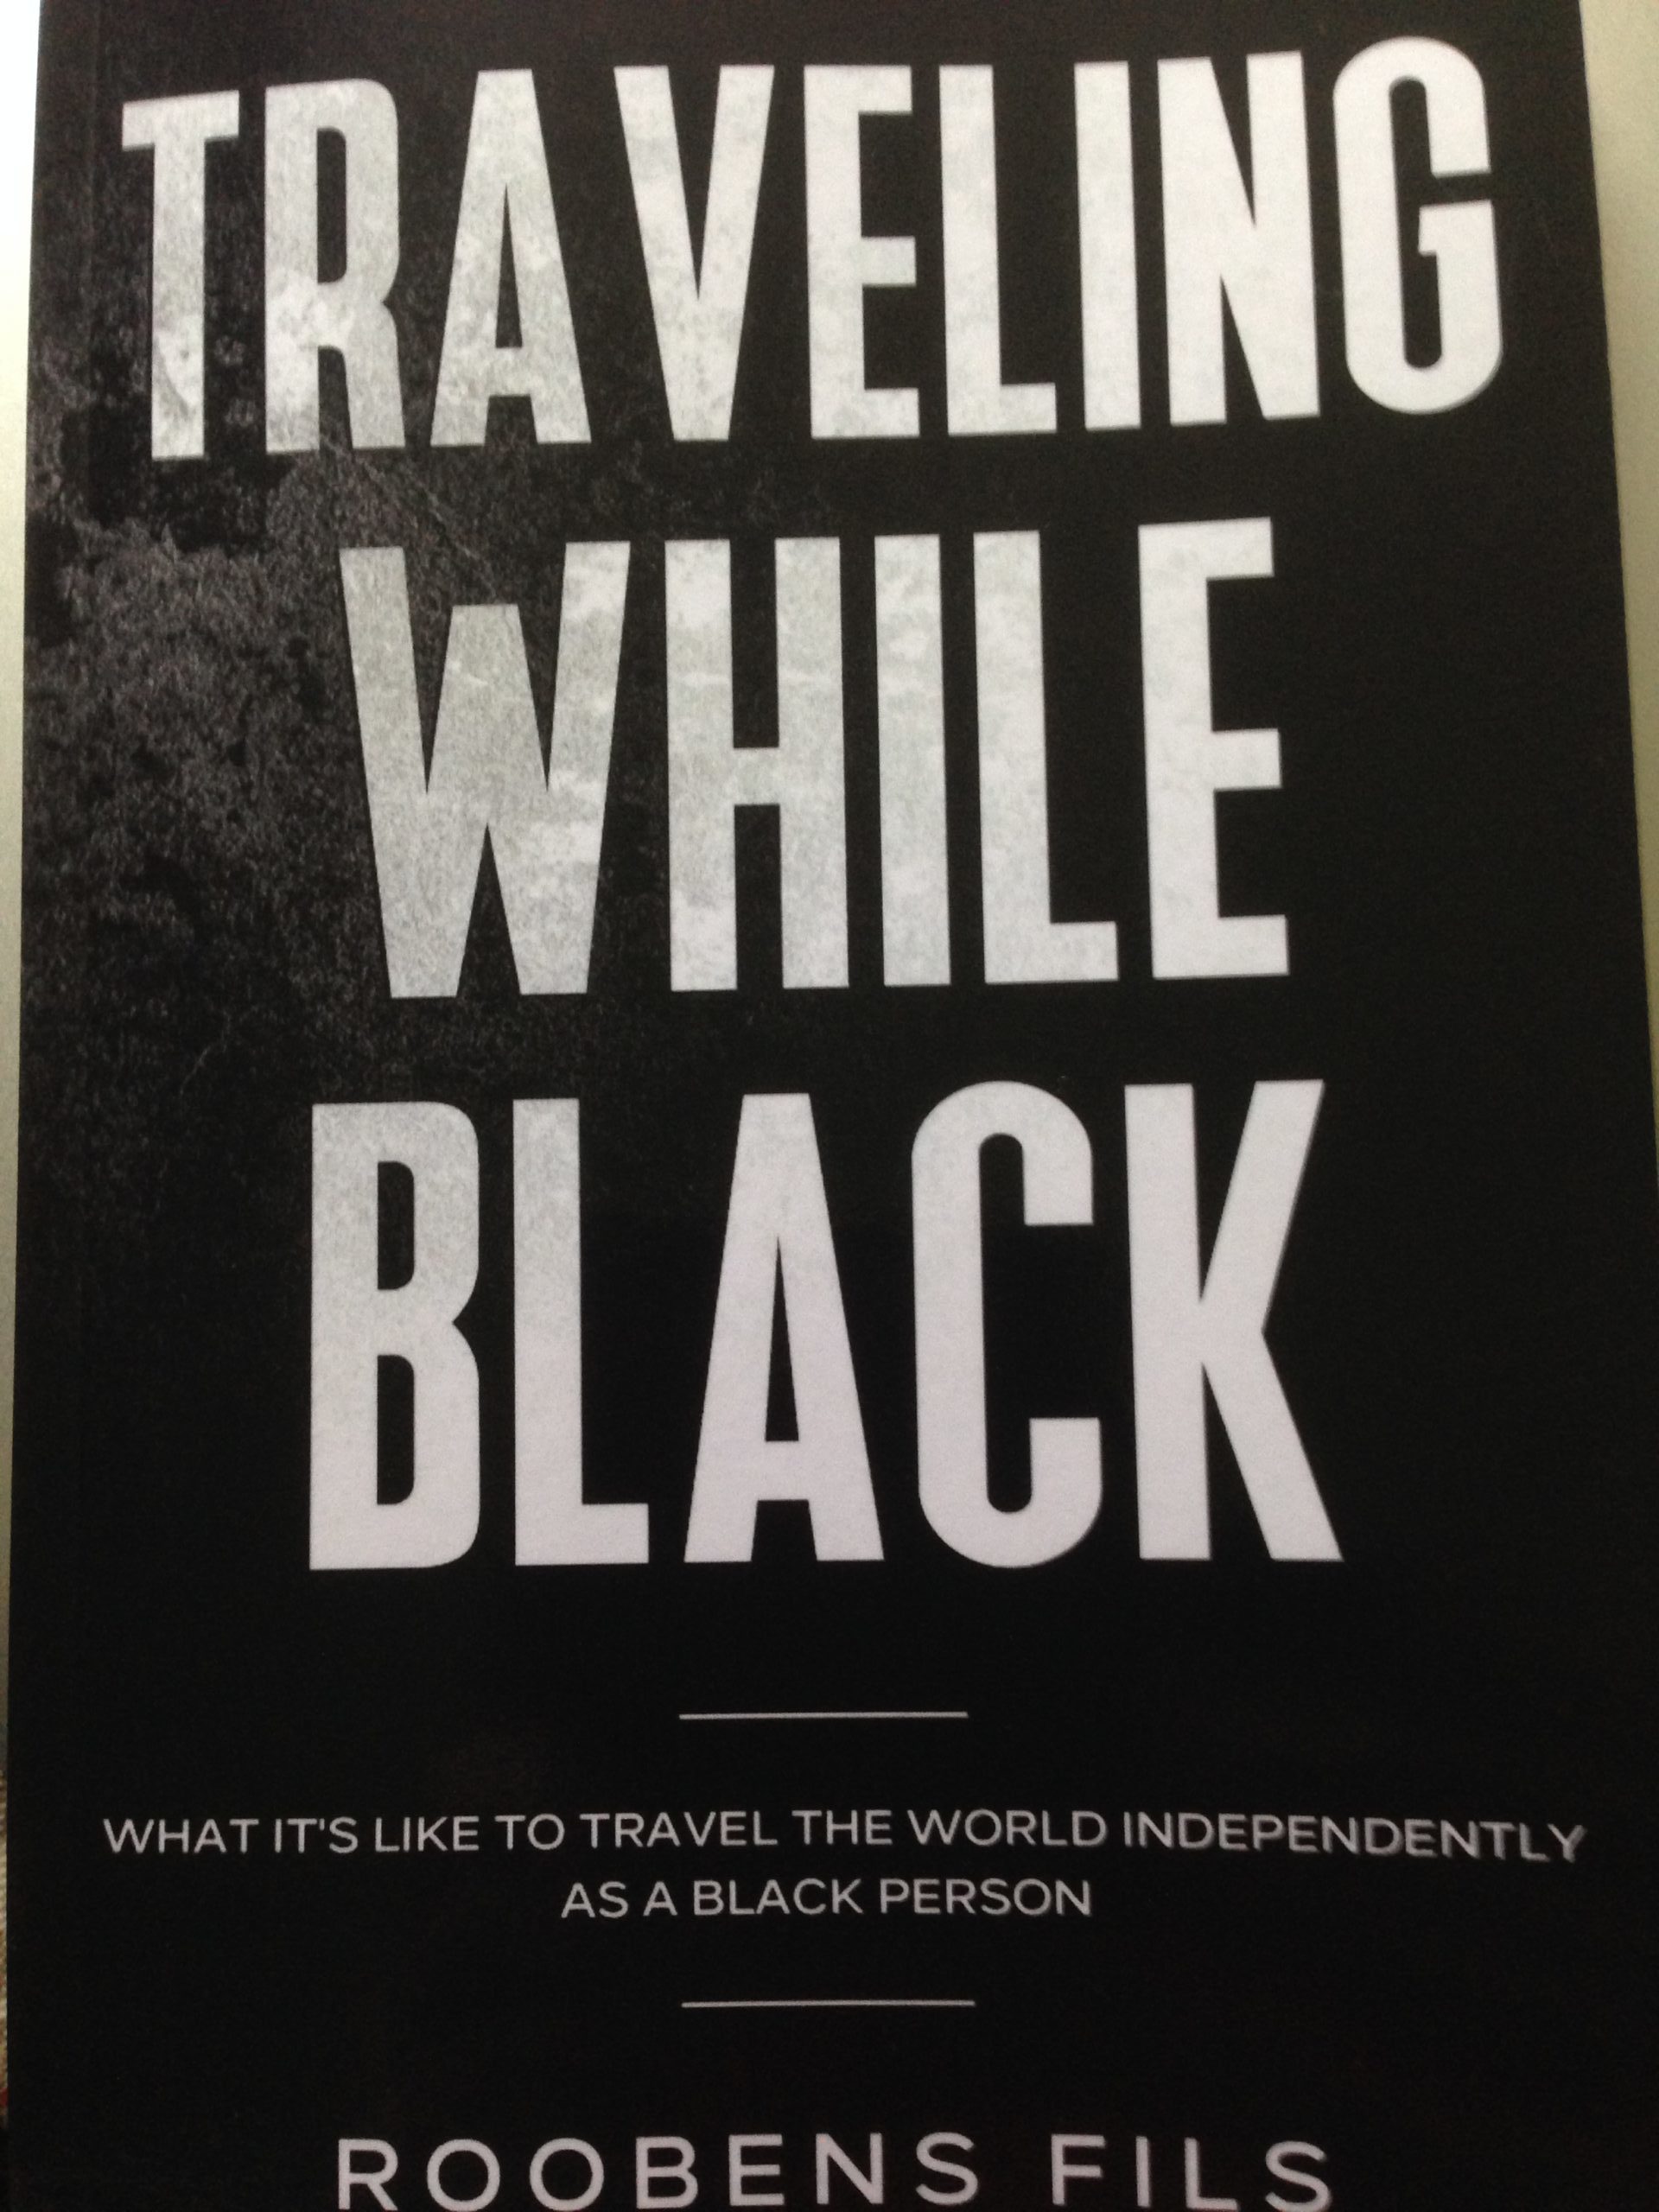 Travelling while black